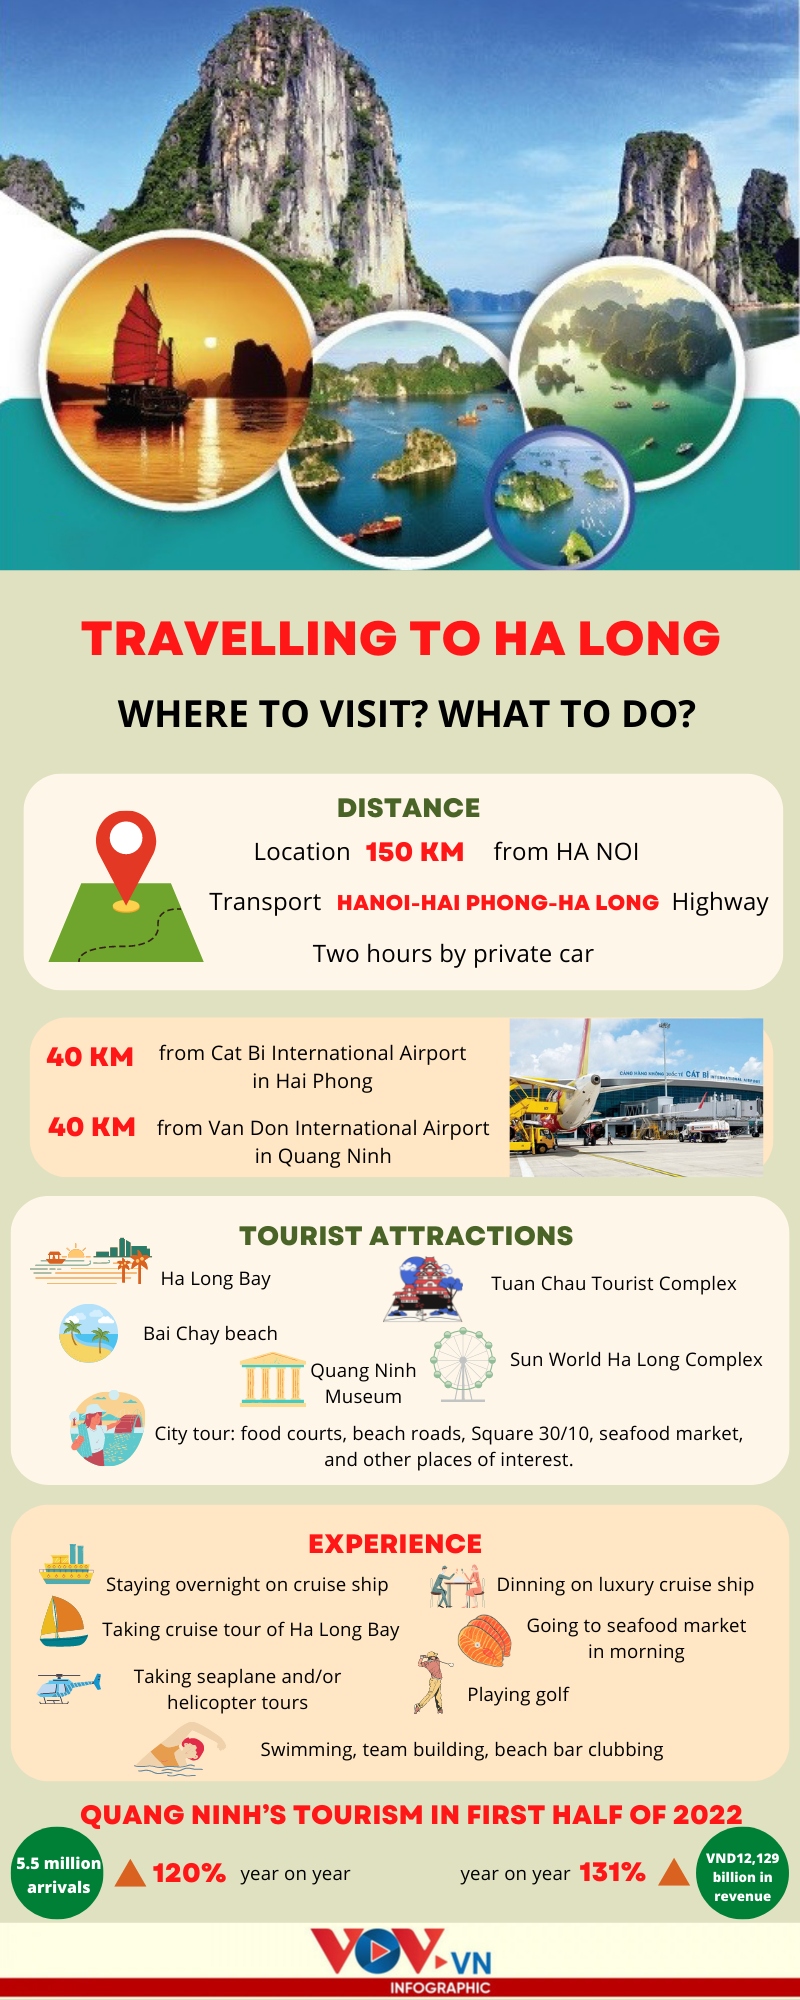 travel tips to ha long where to visit and what to do picture 1